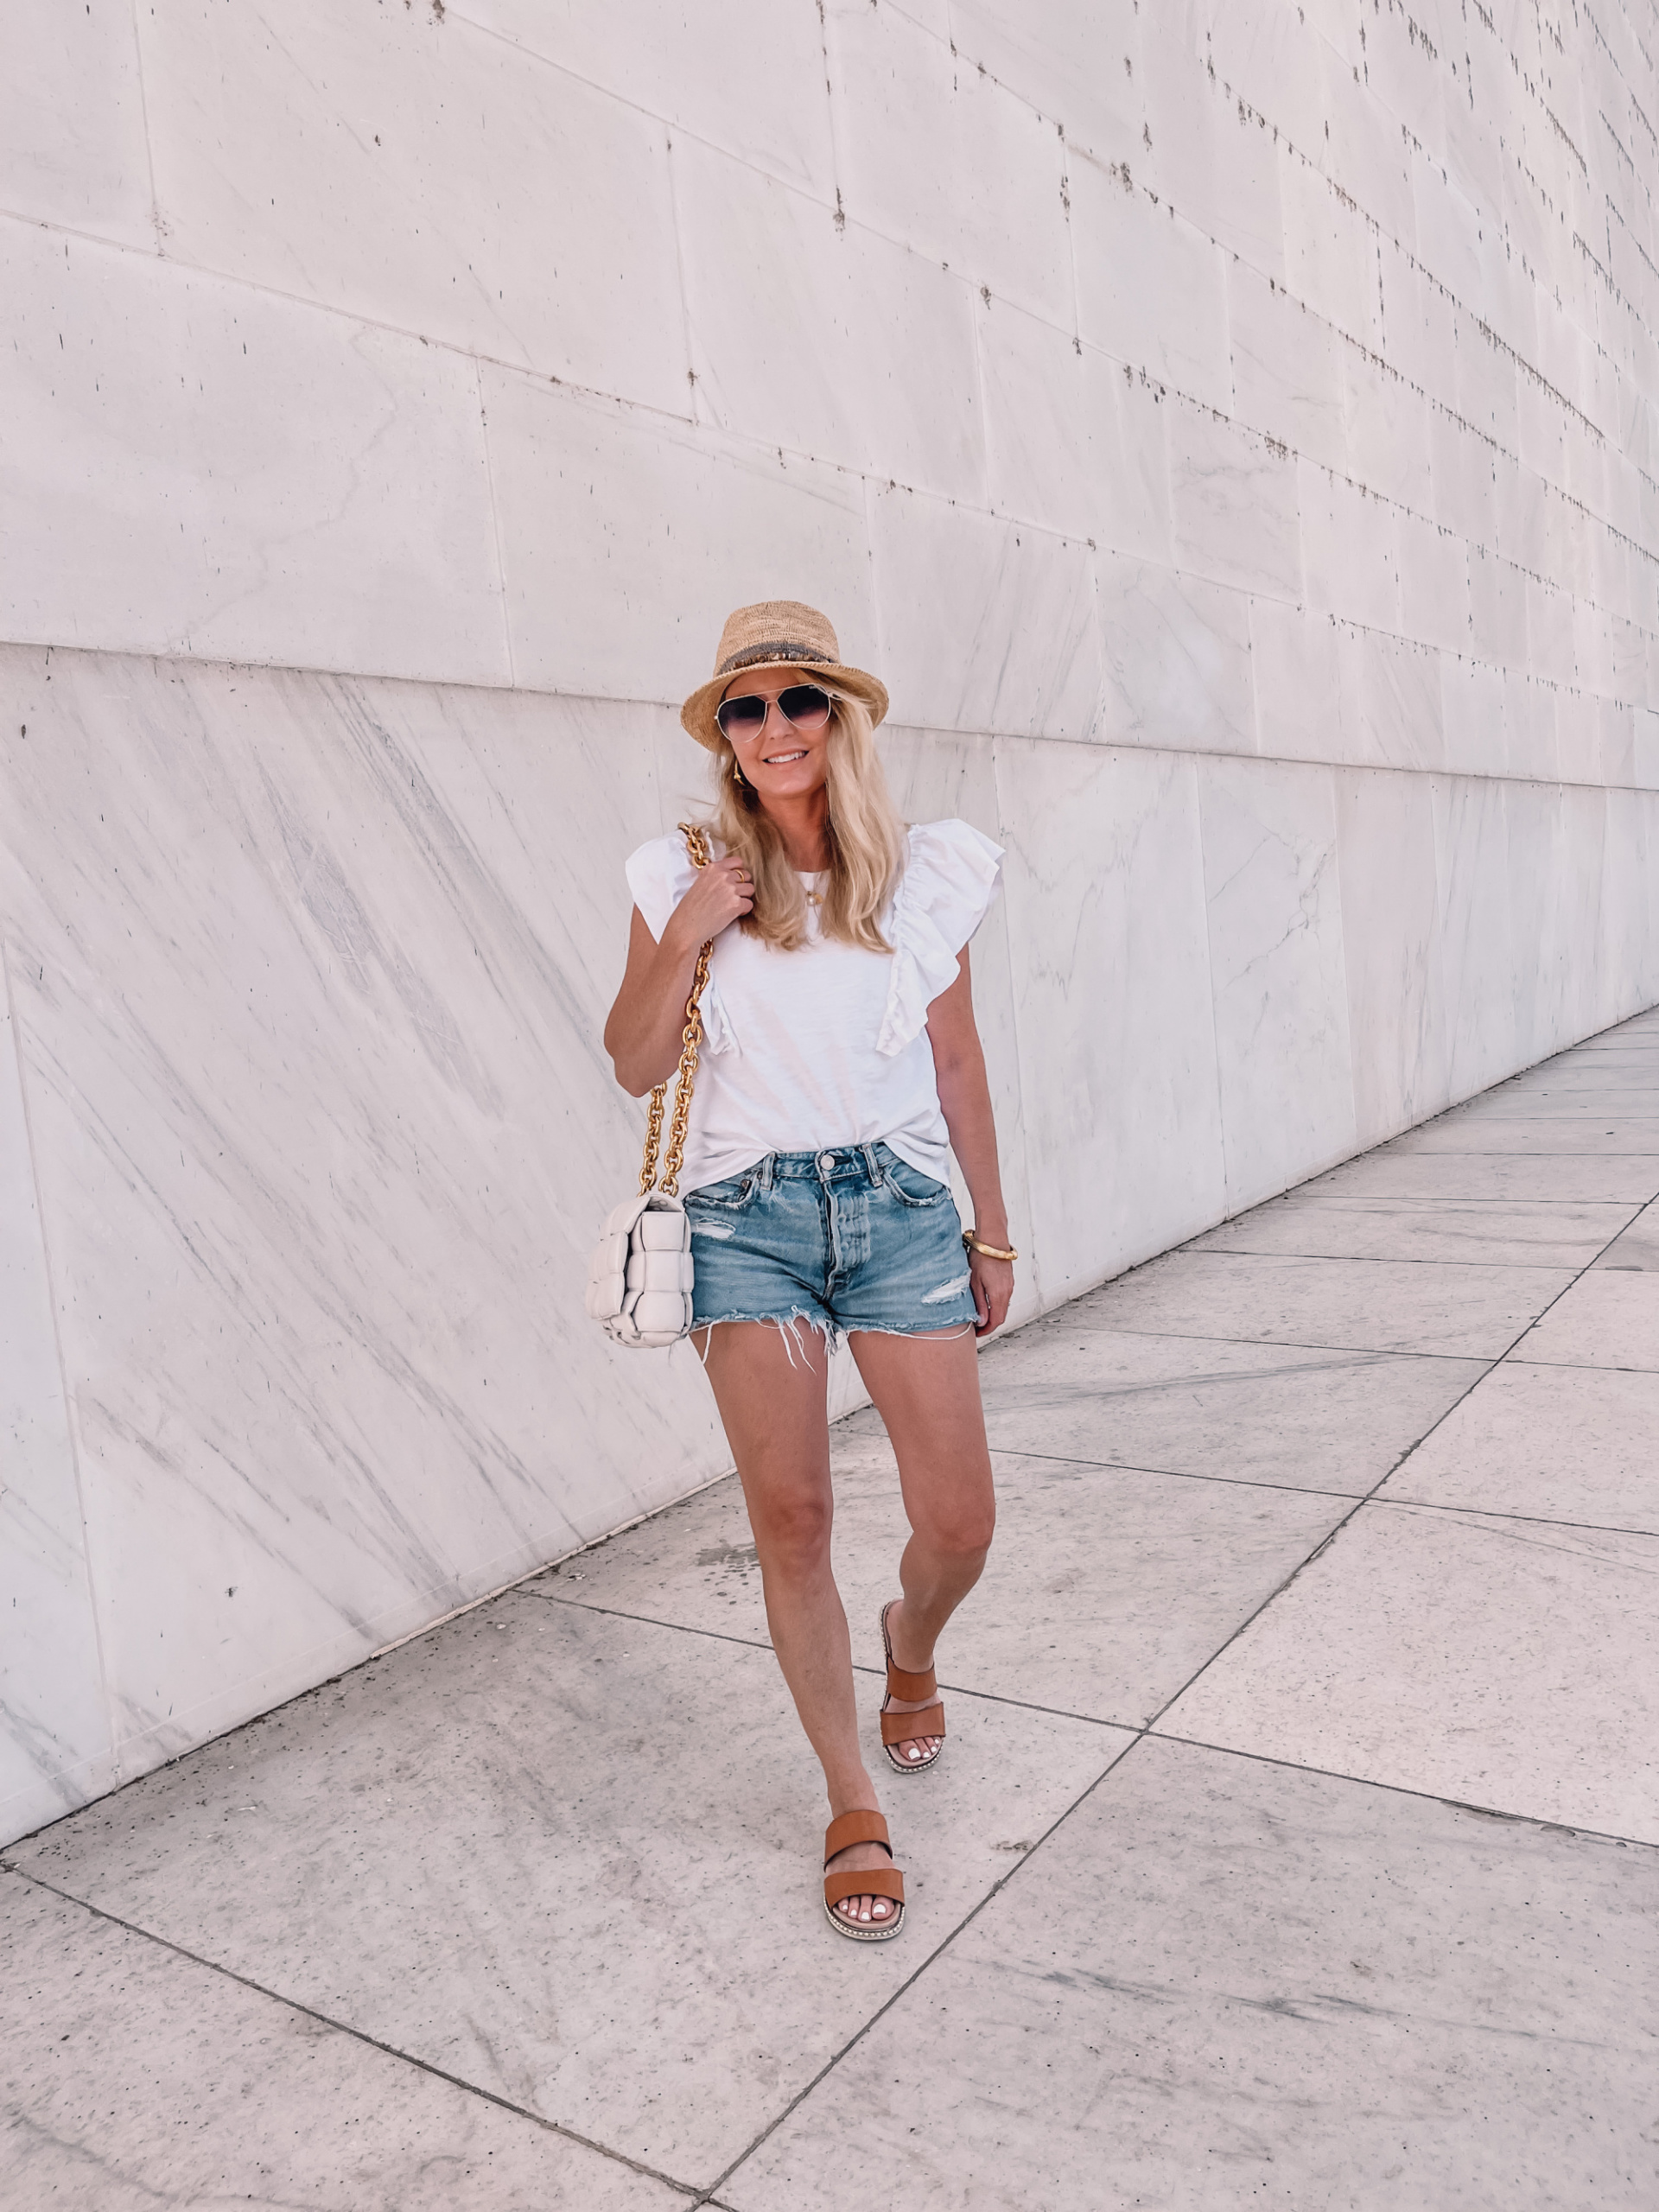 outfits for long road trip featuring Moussy jean shorts and white ruffle shoulder tee by Nation LTD on fashion over 40 blogger Erin Busbee in Washington, DC